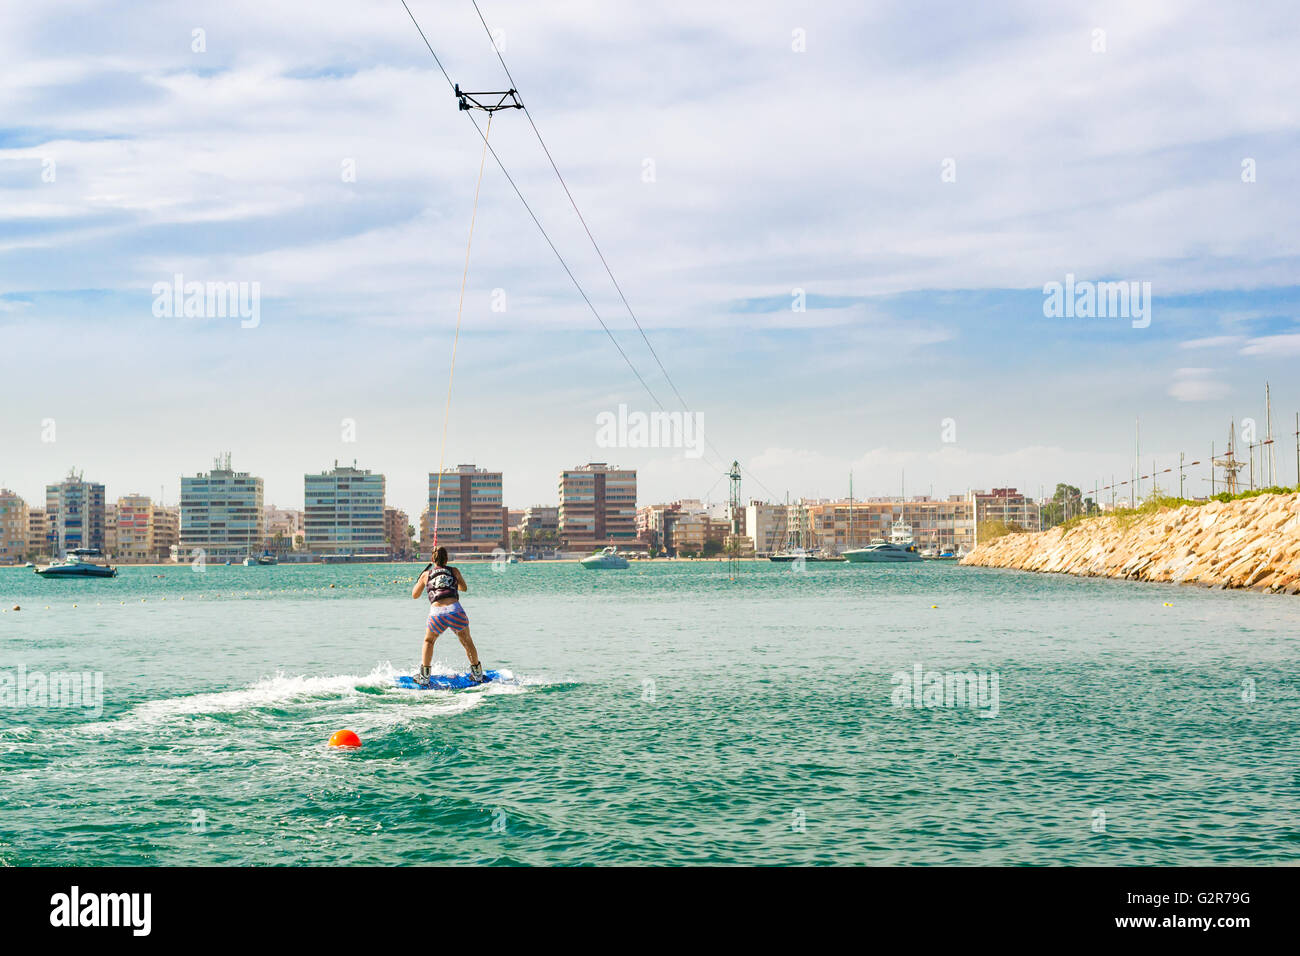 TORREVIEJA, SPAIN - SEPTEMBER 13, 2014: Cute girl learns to surf on background of yachts and boats in La Bocana, Cable Ski Stock Photo